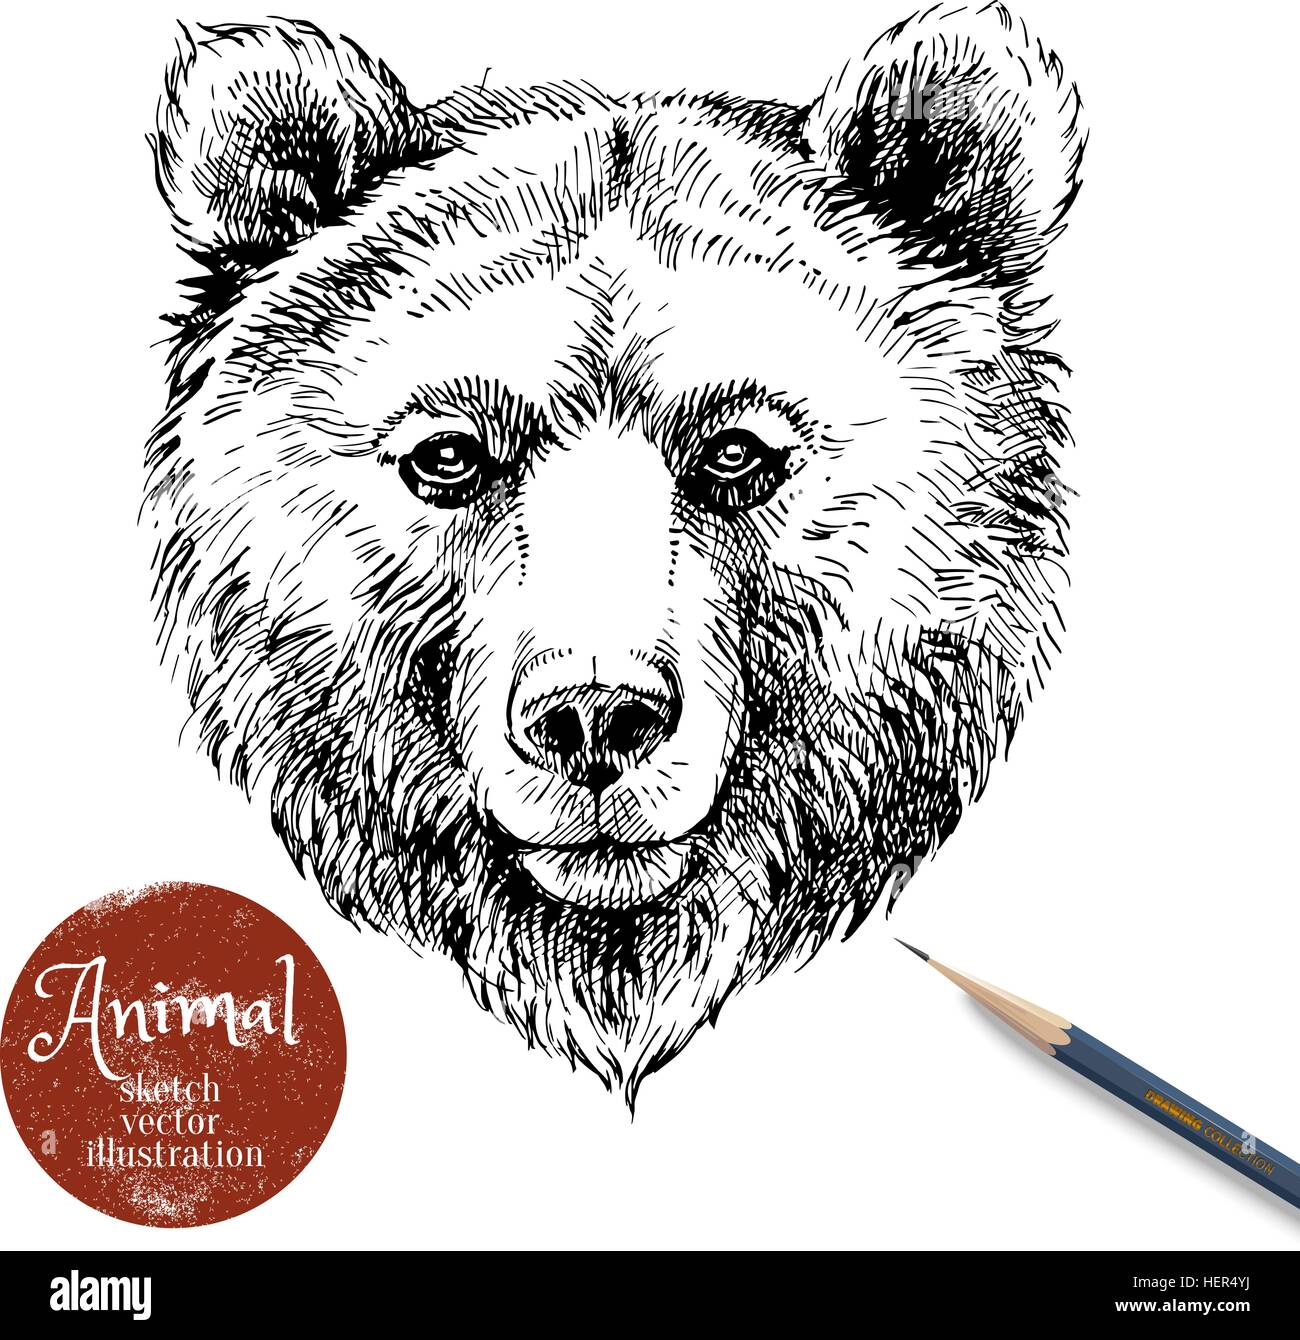 Hand drawn brown bear animal vector illustration. Sketch isolated bear portrait on white background with pencil and label banner Stock Vector